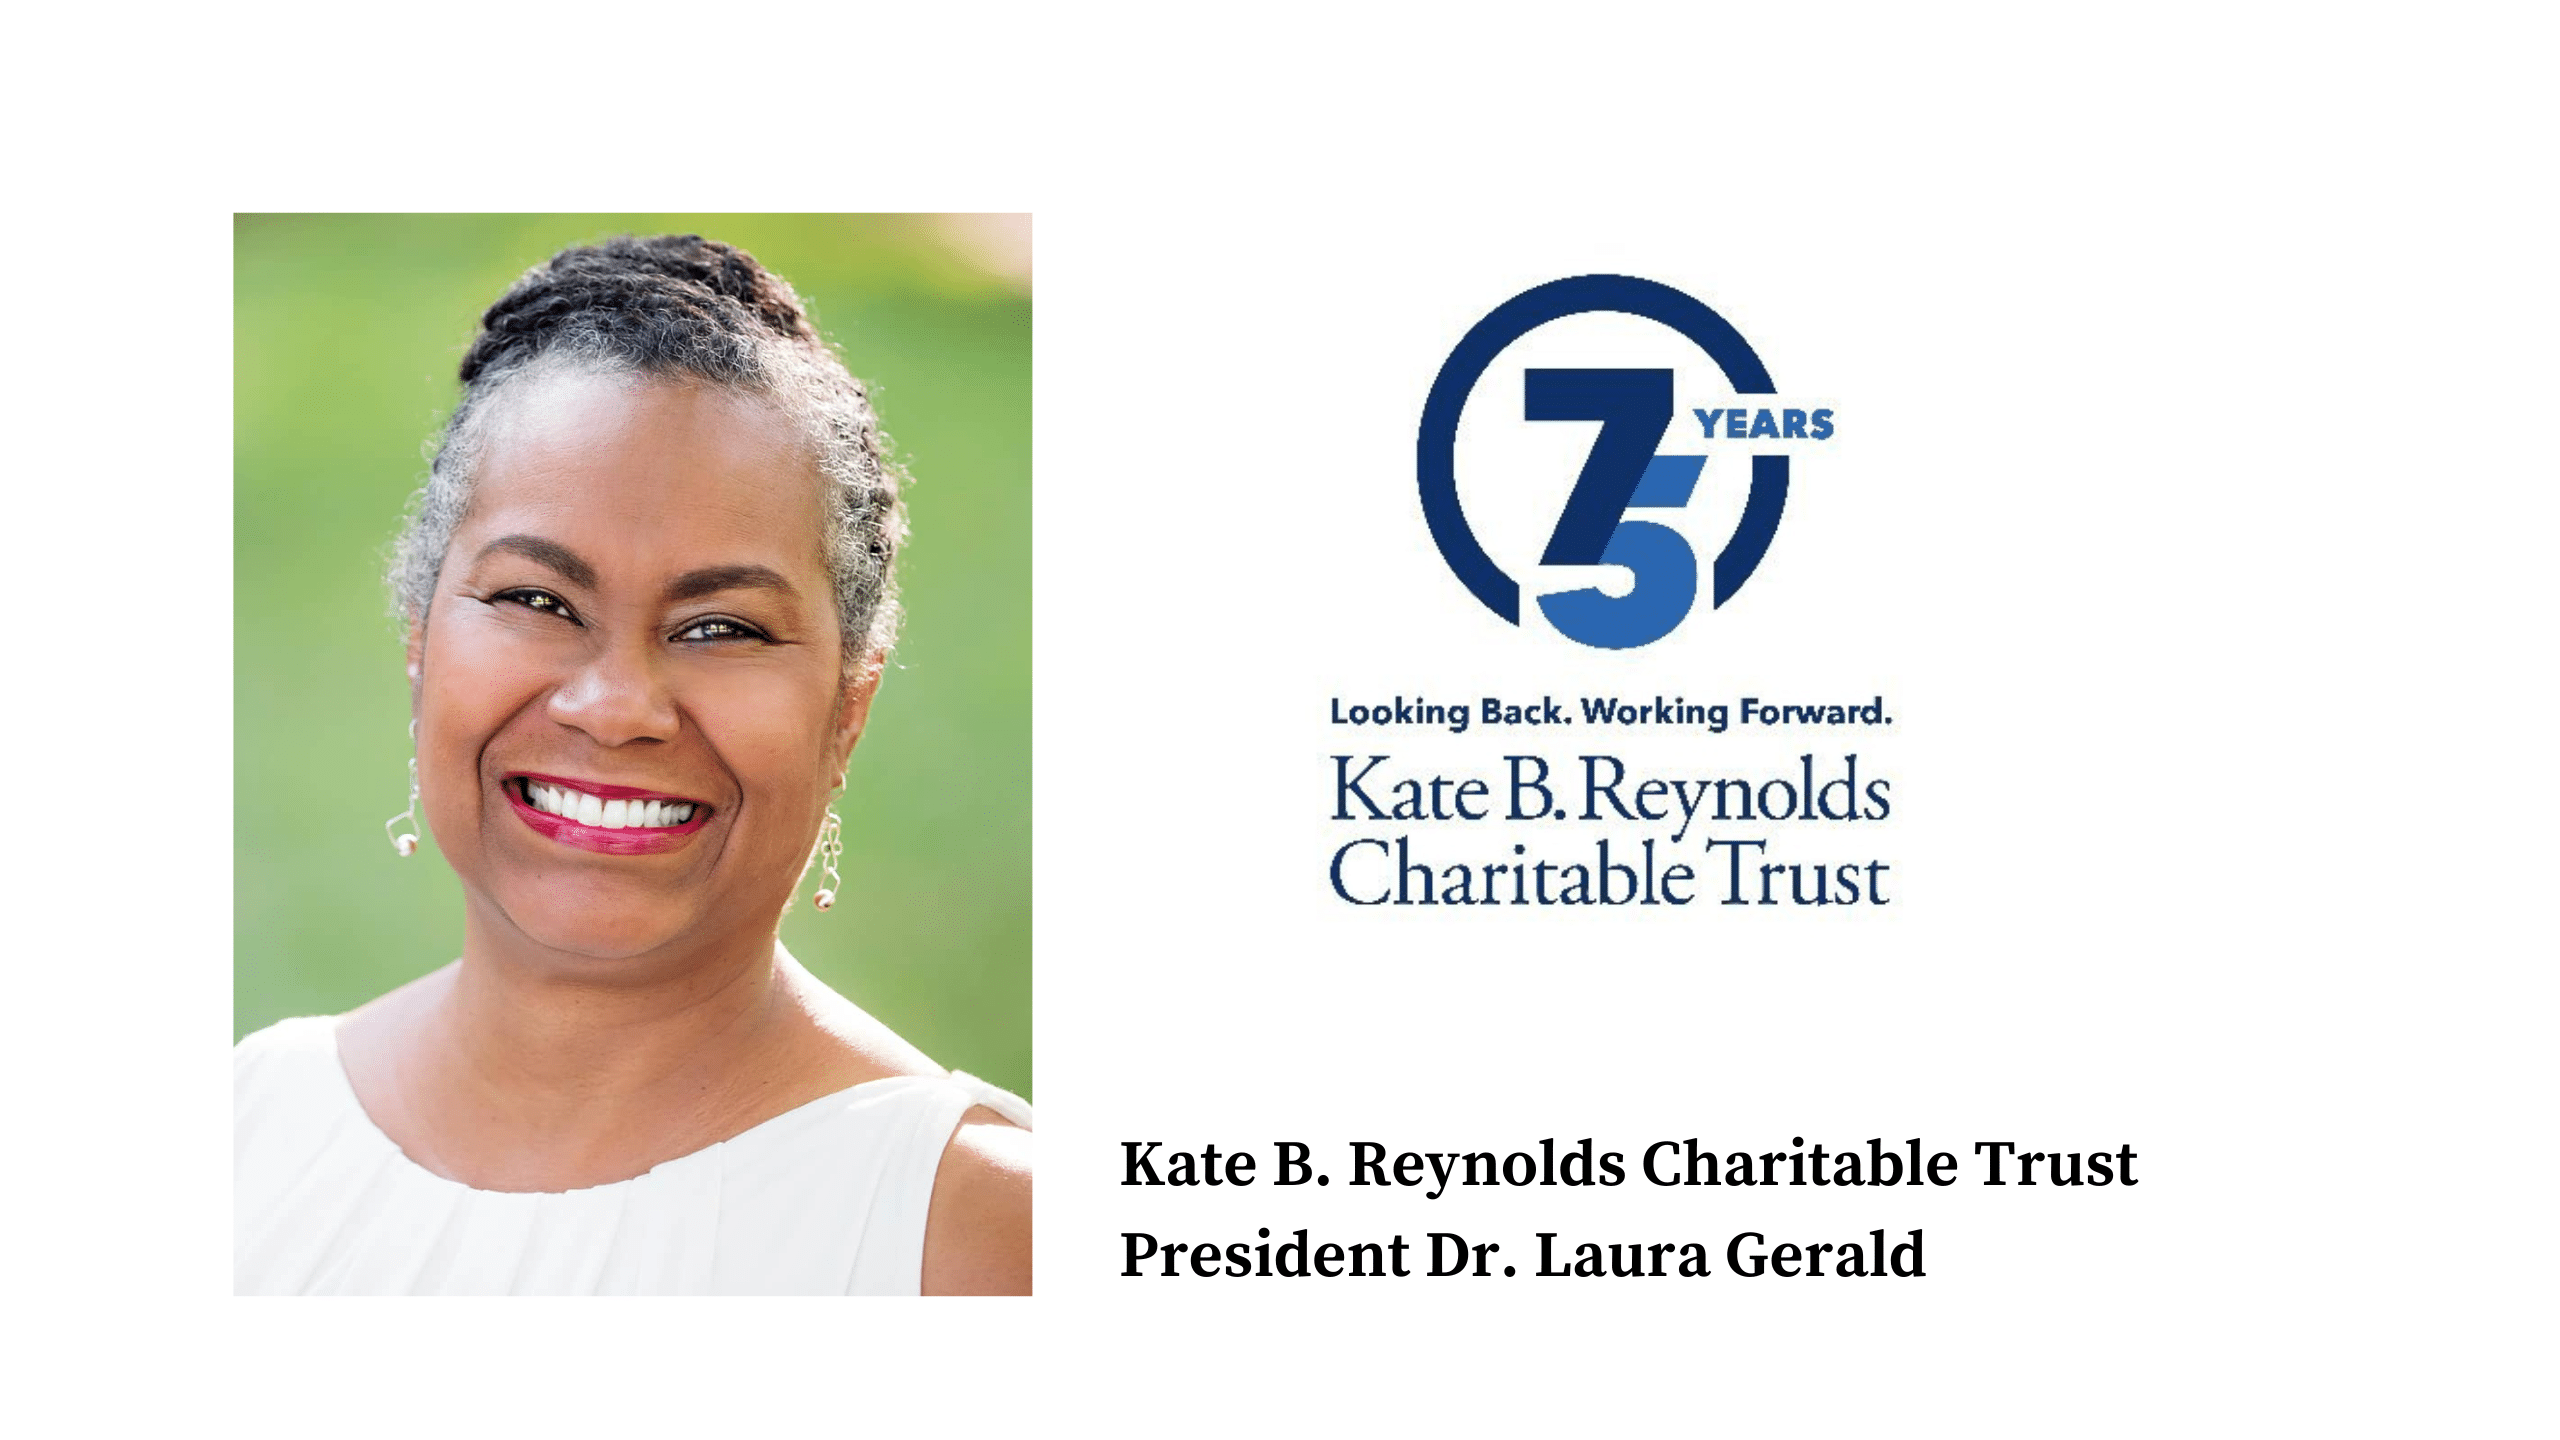 Critical Conversations with Scott T. Hamilton featuring Dr. Laura Gerald, President of the Kate B. Reynolds Charitable Trust